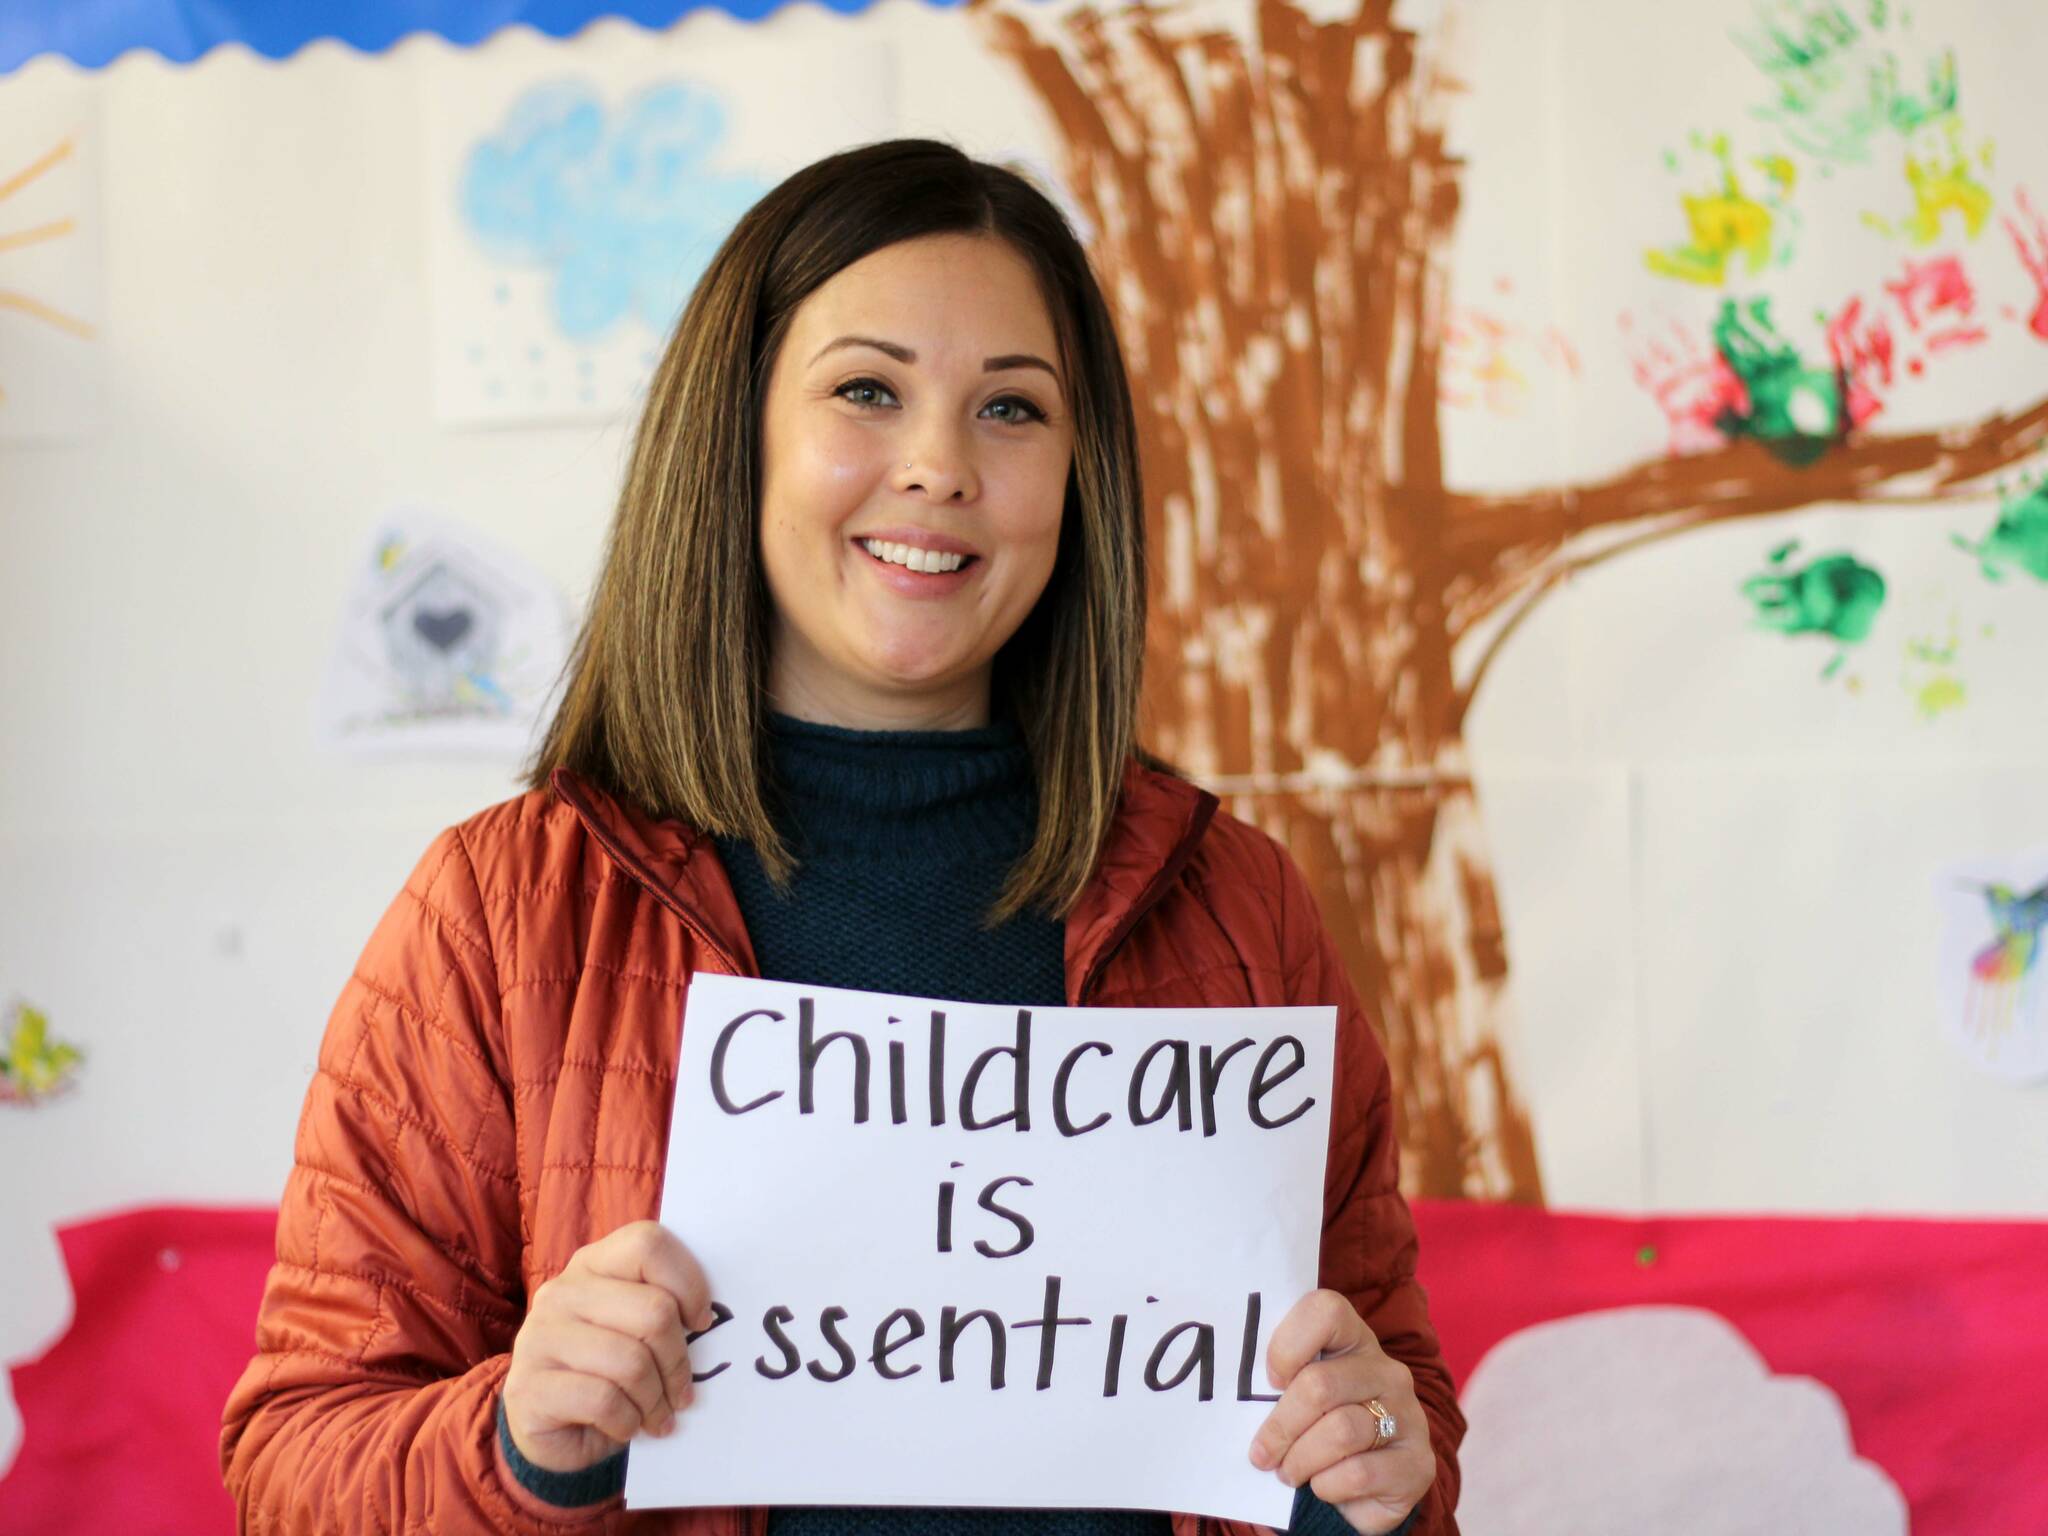 Kayla Svinicki, director and owner of Little Moon Child Care on Jan. 28. Svinicki said that providing childcare is essential but that the economics of the situation make the work difficult. She said she hopes the country starts to treat childcare as part of the nation’s infrastructure. (Dana Zigmund/Juneau Empire)